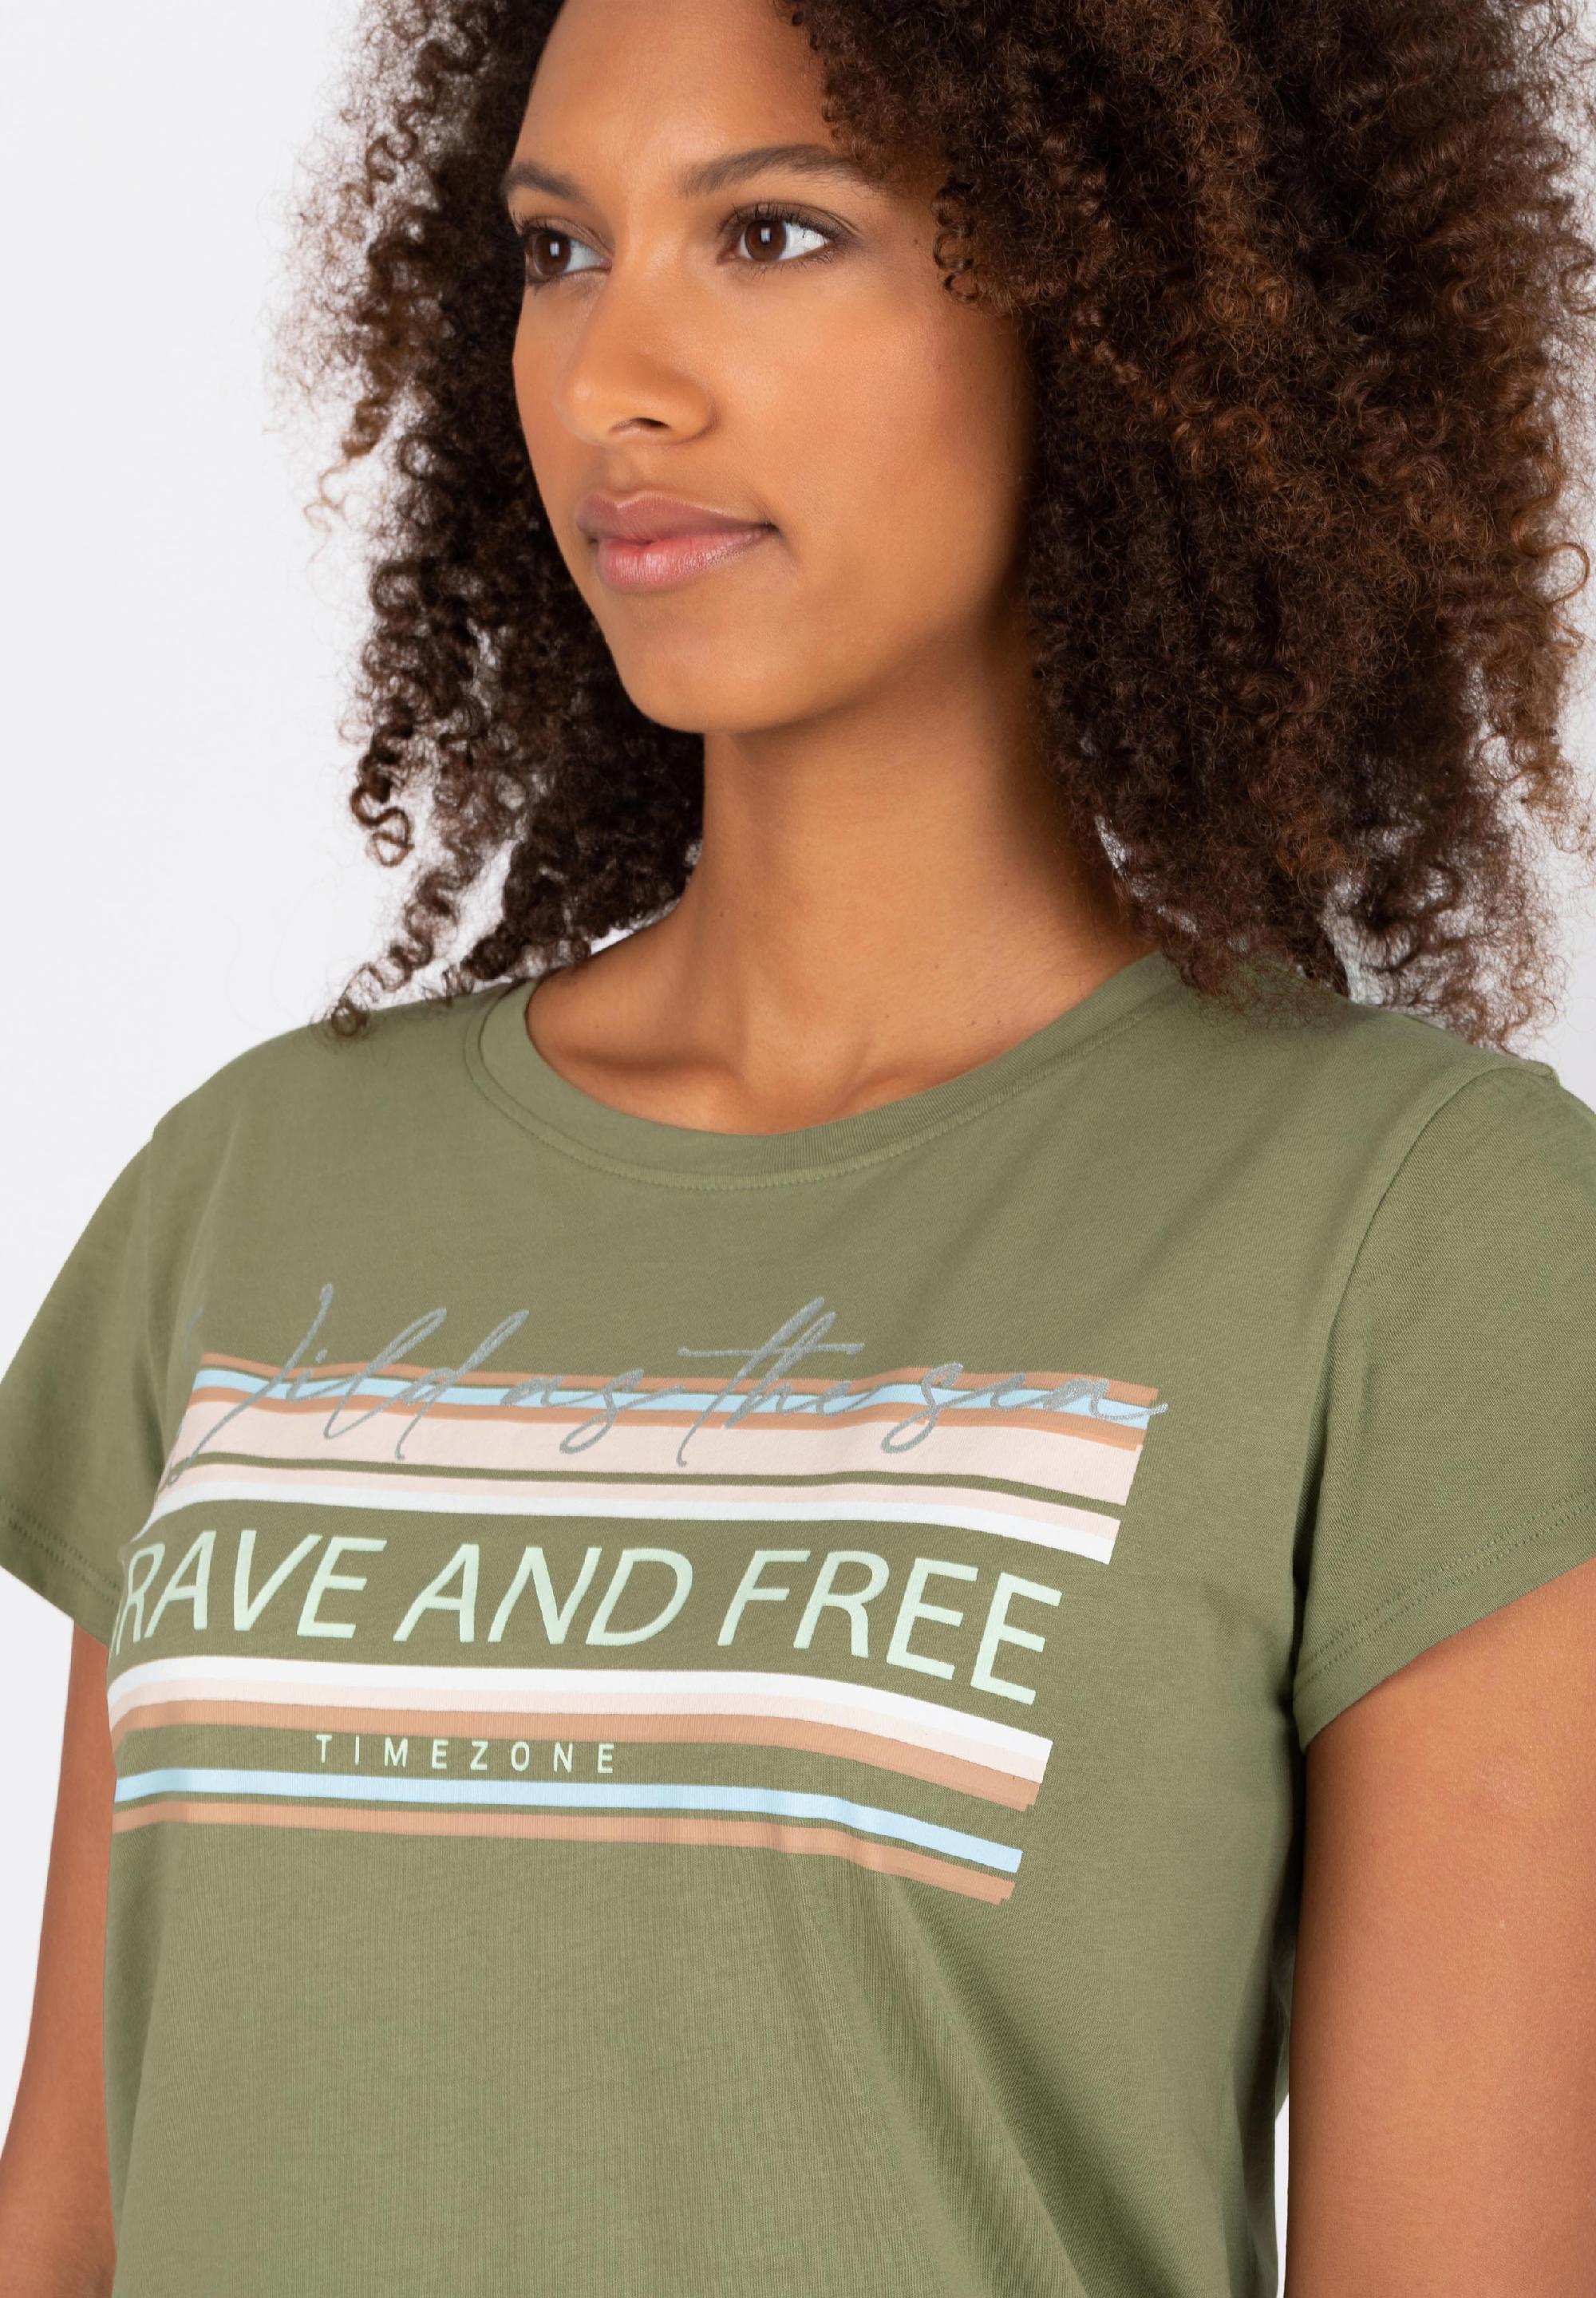 Brave and Free T-Shirt decoration